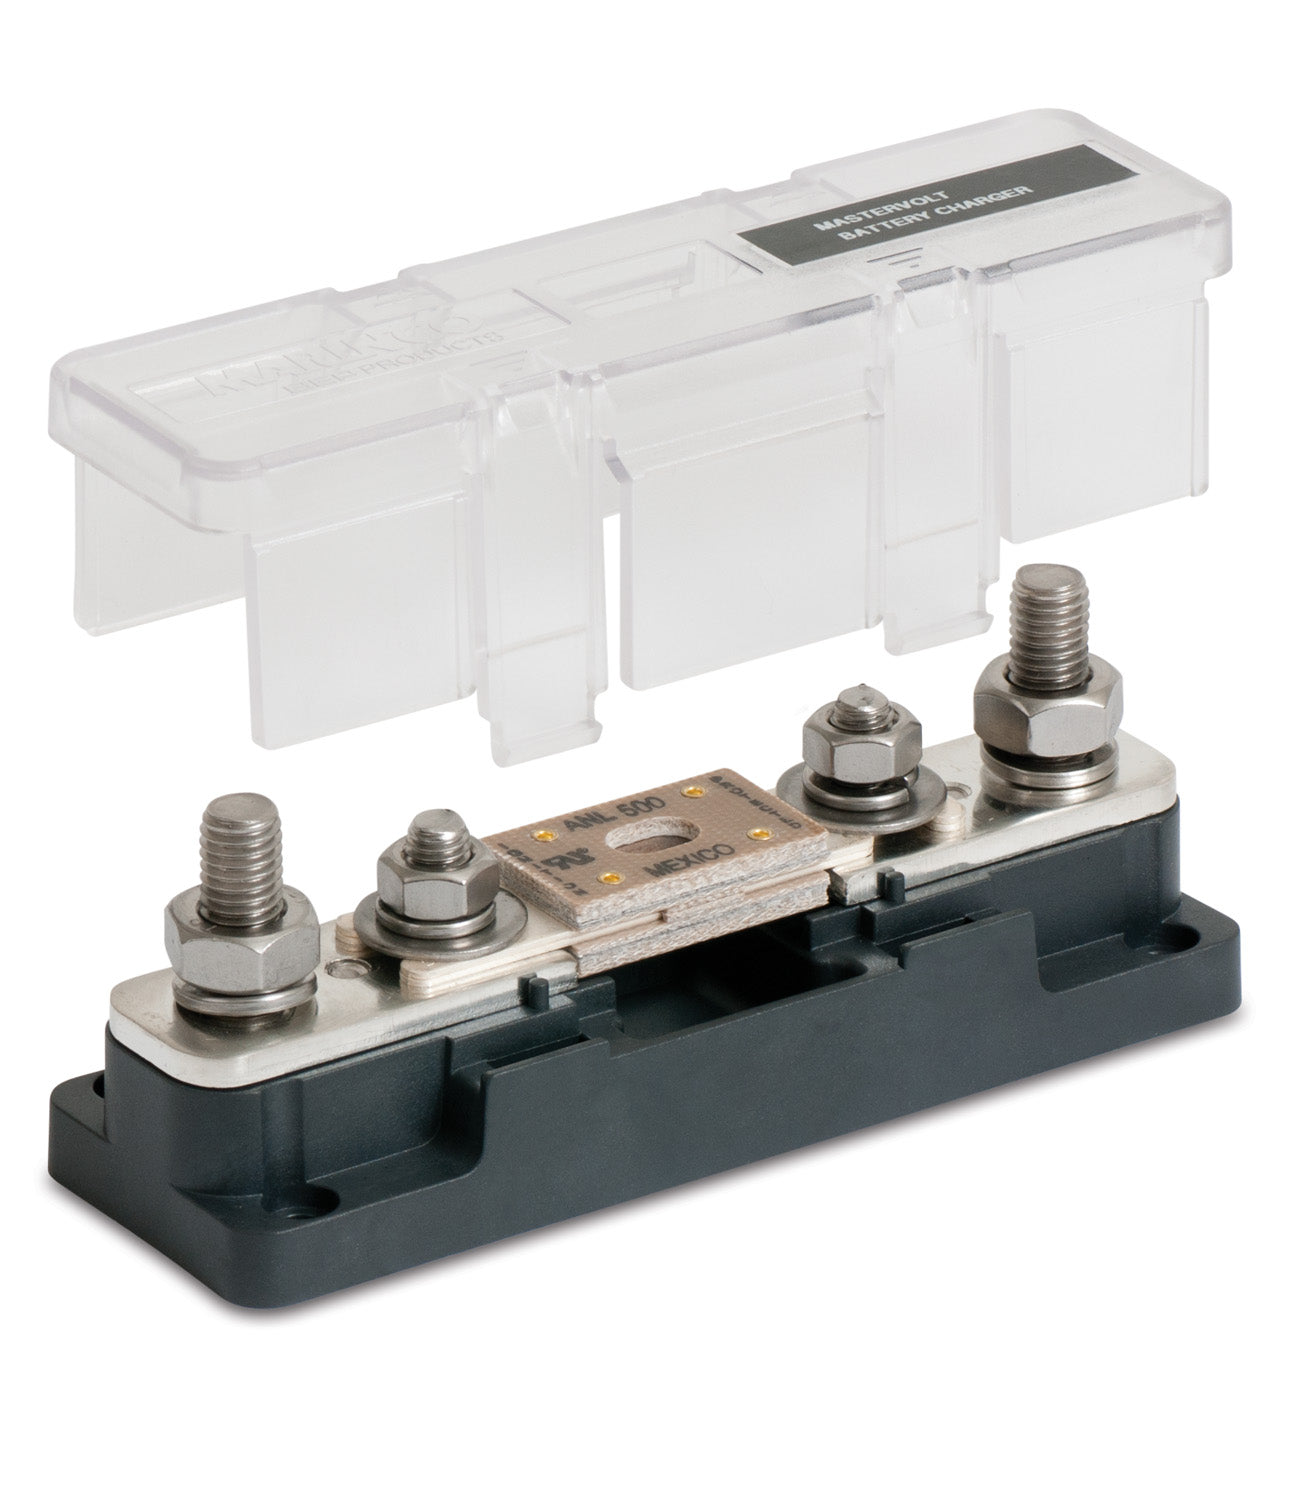 Bep 778-anl2s Anl Fuse Holder For Up To 750amp Fuse With 2 Additional Studs